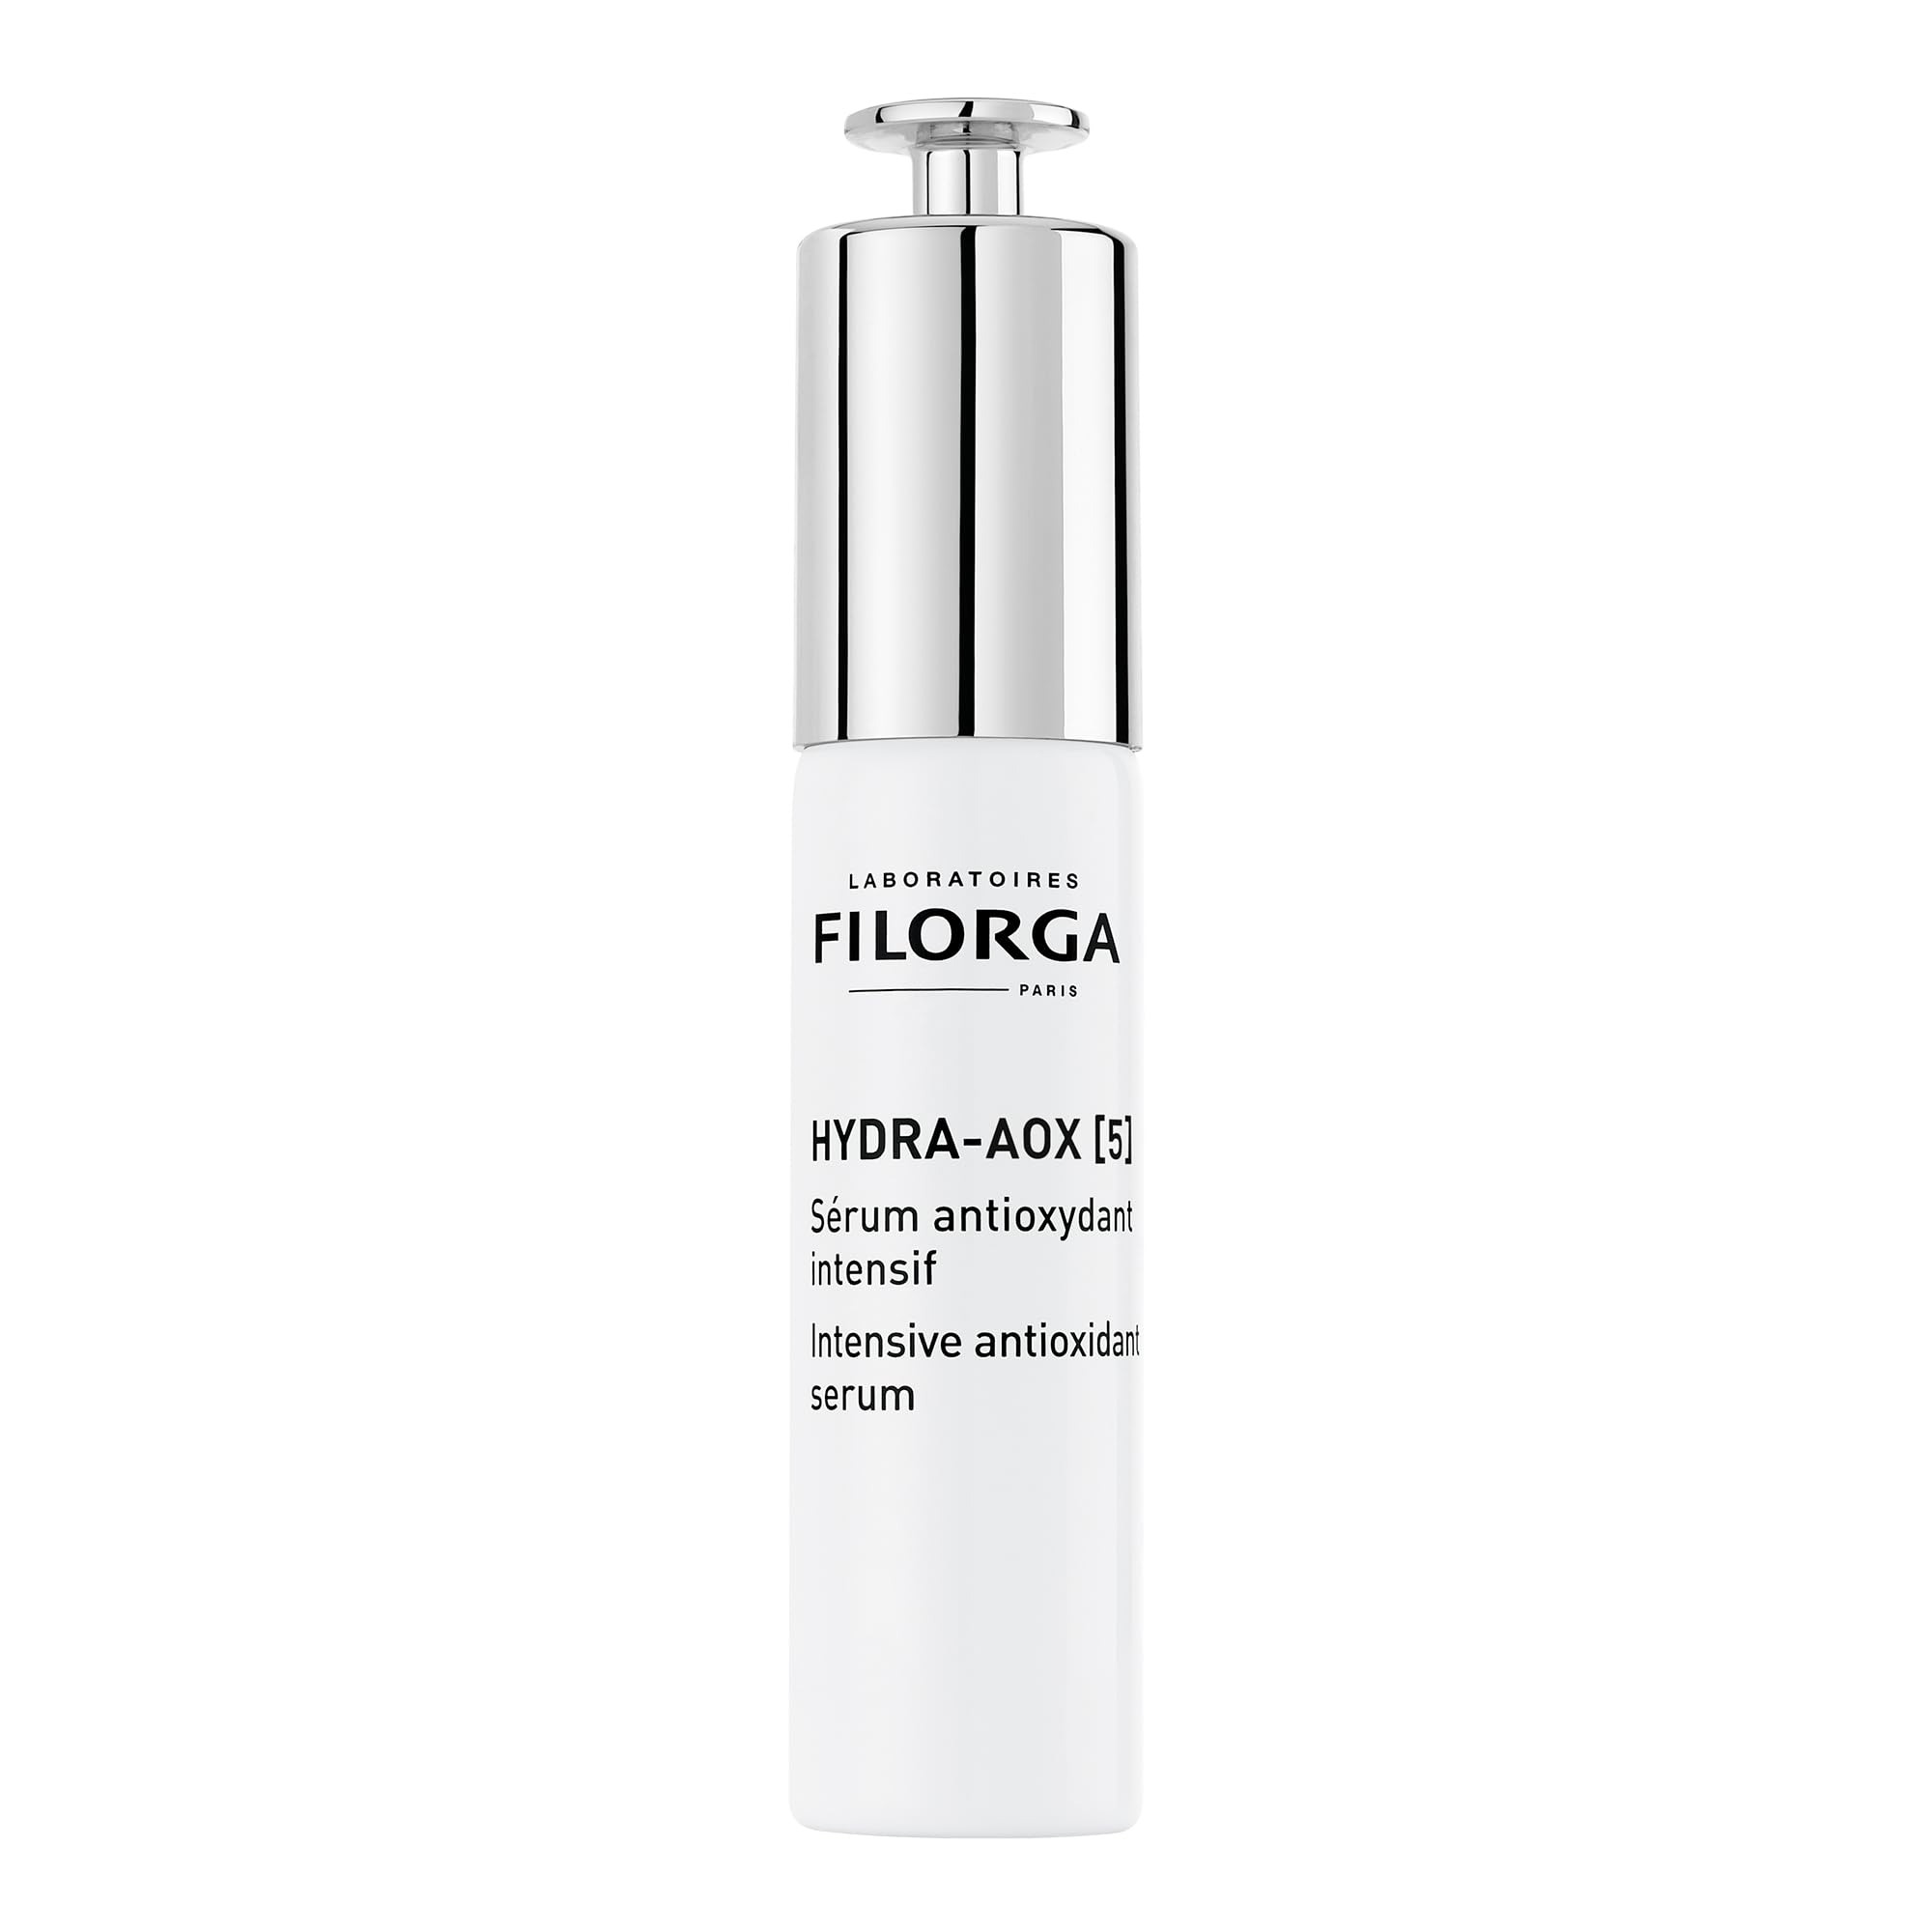 Filorga Hydra-AOX [5] Antioxidant Face Serum, 5 Powerful Antioxidants Including Vitamin C, E, and B3 Smooth and Protect Skin from Premature Aging and Oxidative Stress from Free Radicals, 1.01 fl. oz